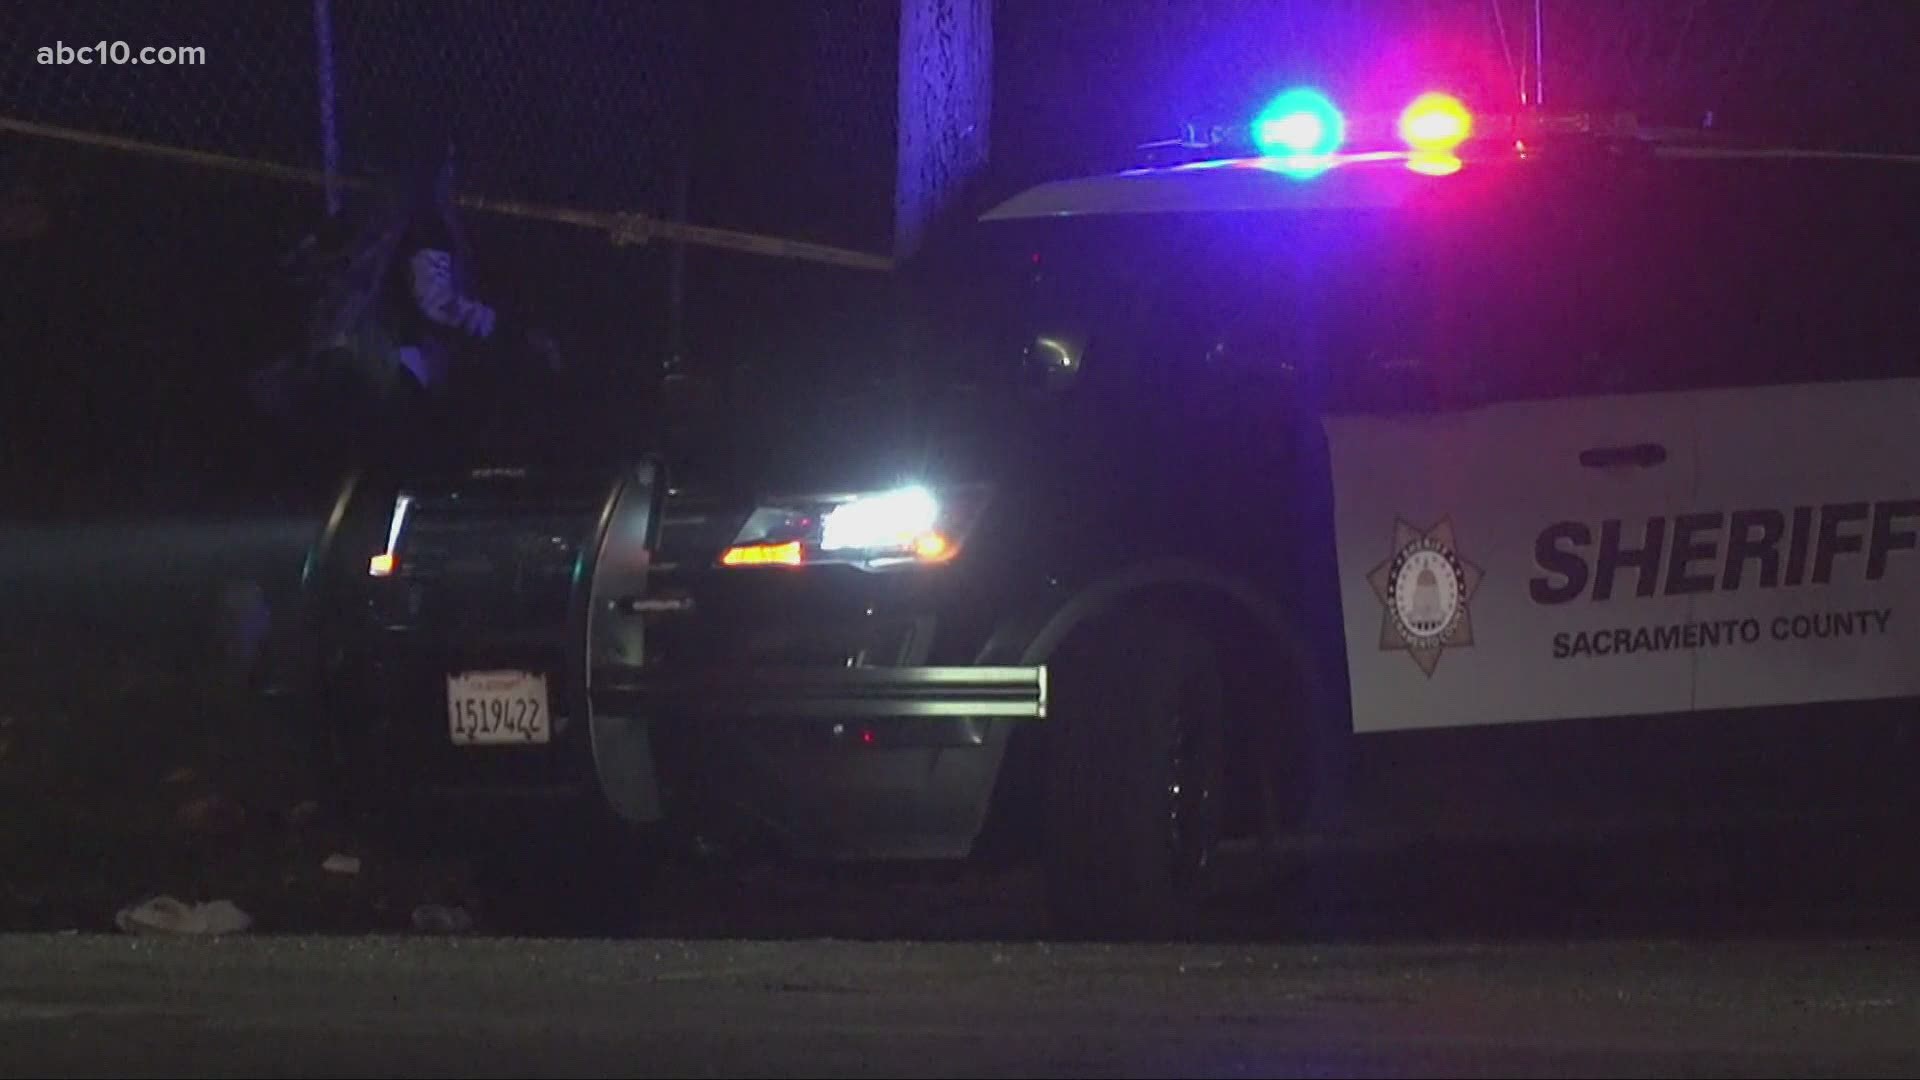 Sacramento County Sheriff’s officials said the shooting happened on the 3900 block of Renick Way at around 8:03 p.m.